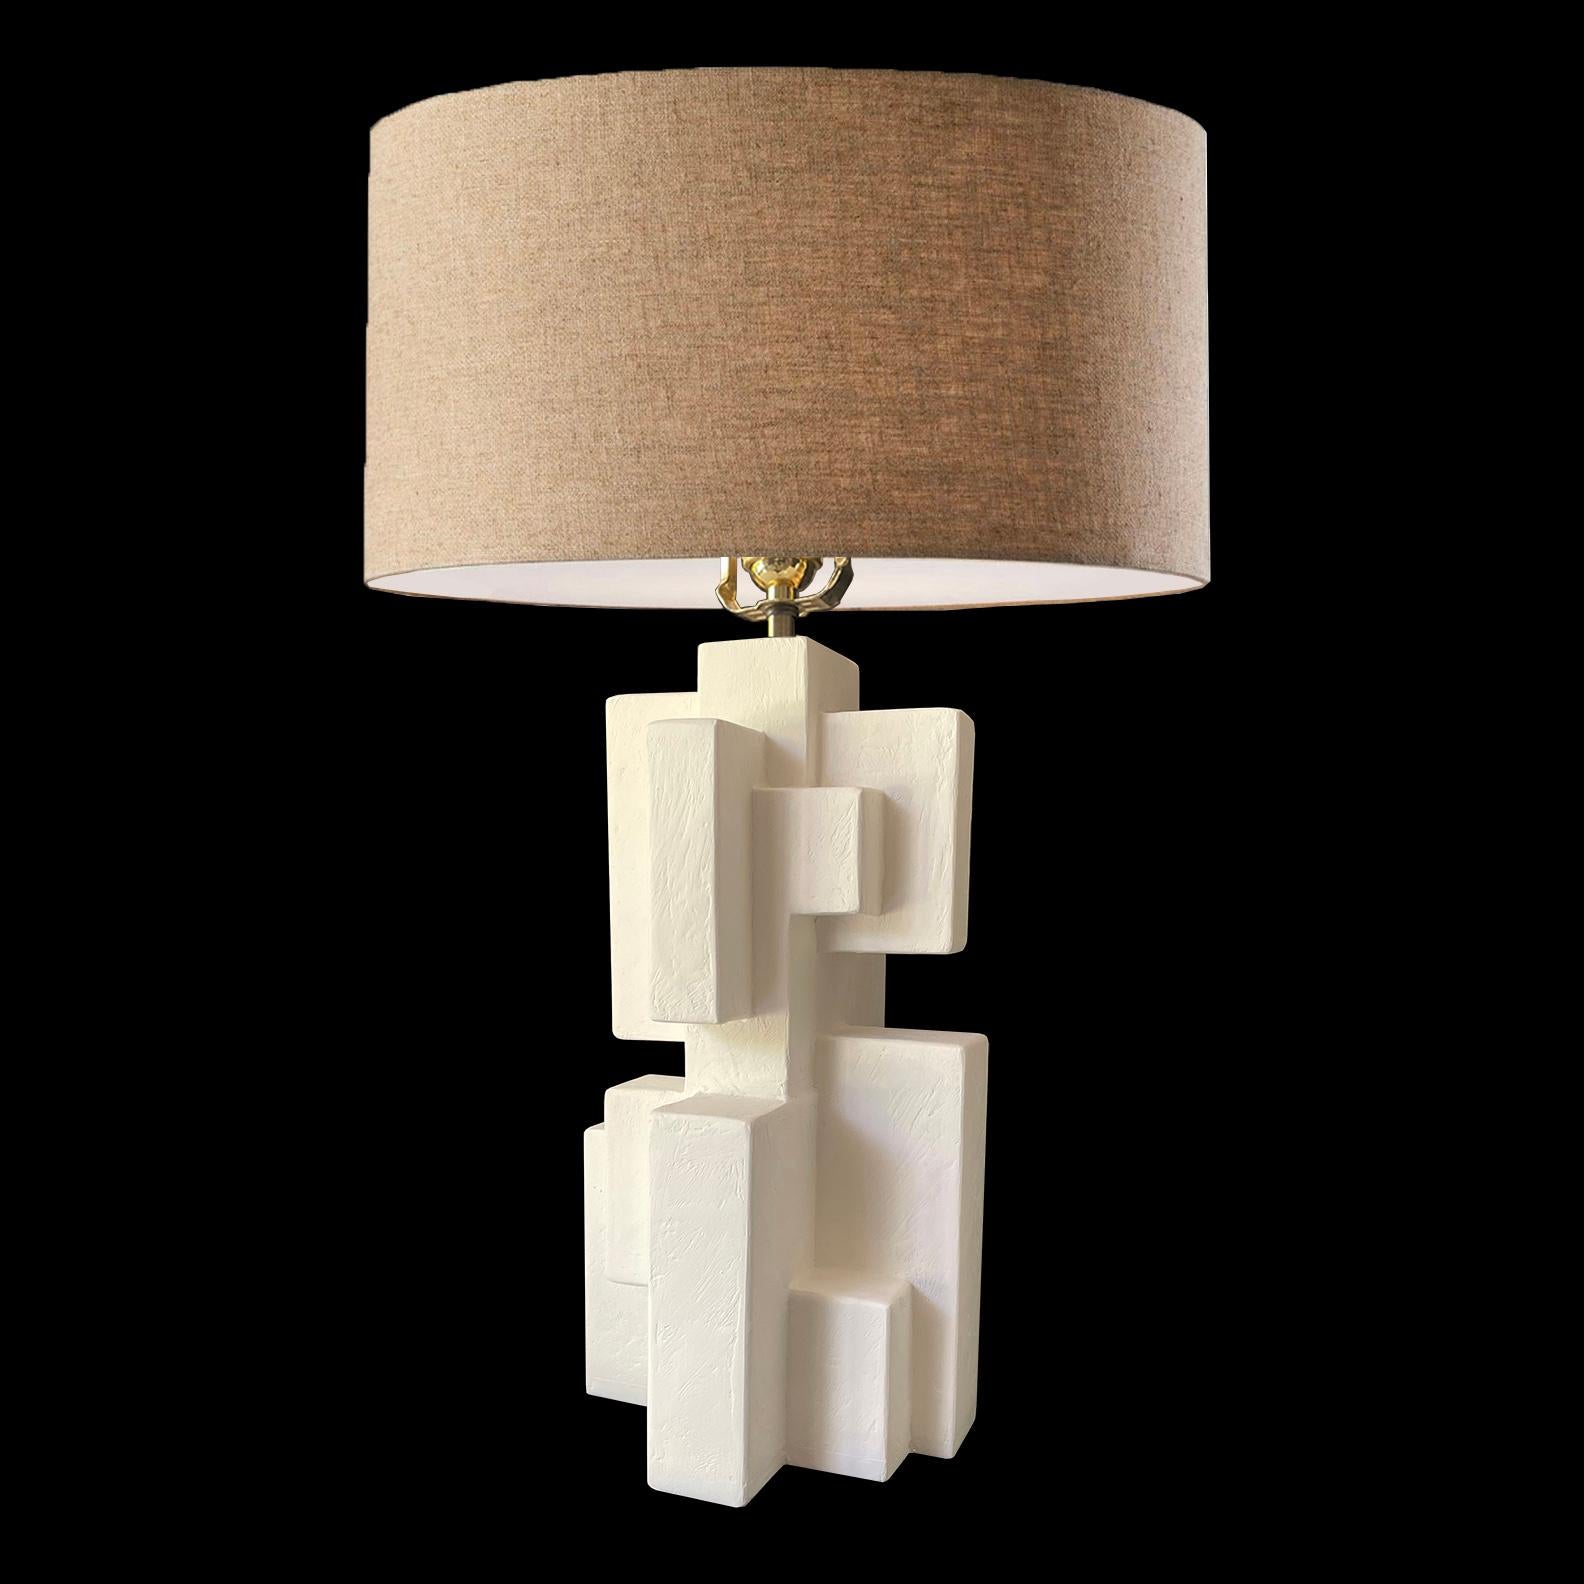 Pablo table lamp by Daniel Schneiger
Dimensions: D 23 x W 23 x H 51 cm
Materials: Wood and resin
Shade not included. Custom finishes available.

CAST\ 
A collection of new lighting by Dan Schneiger
Cast from gypsum plaster, this new collection of